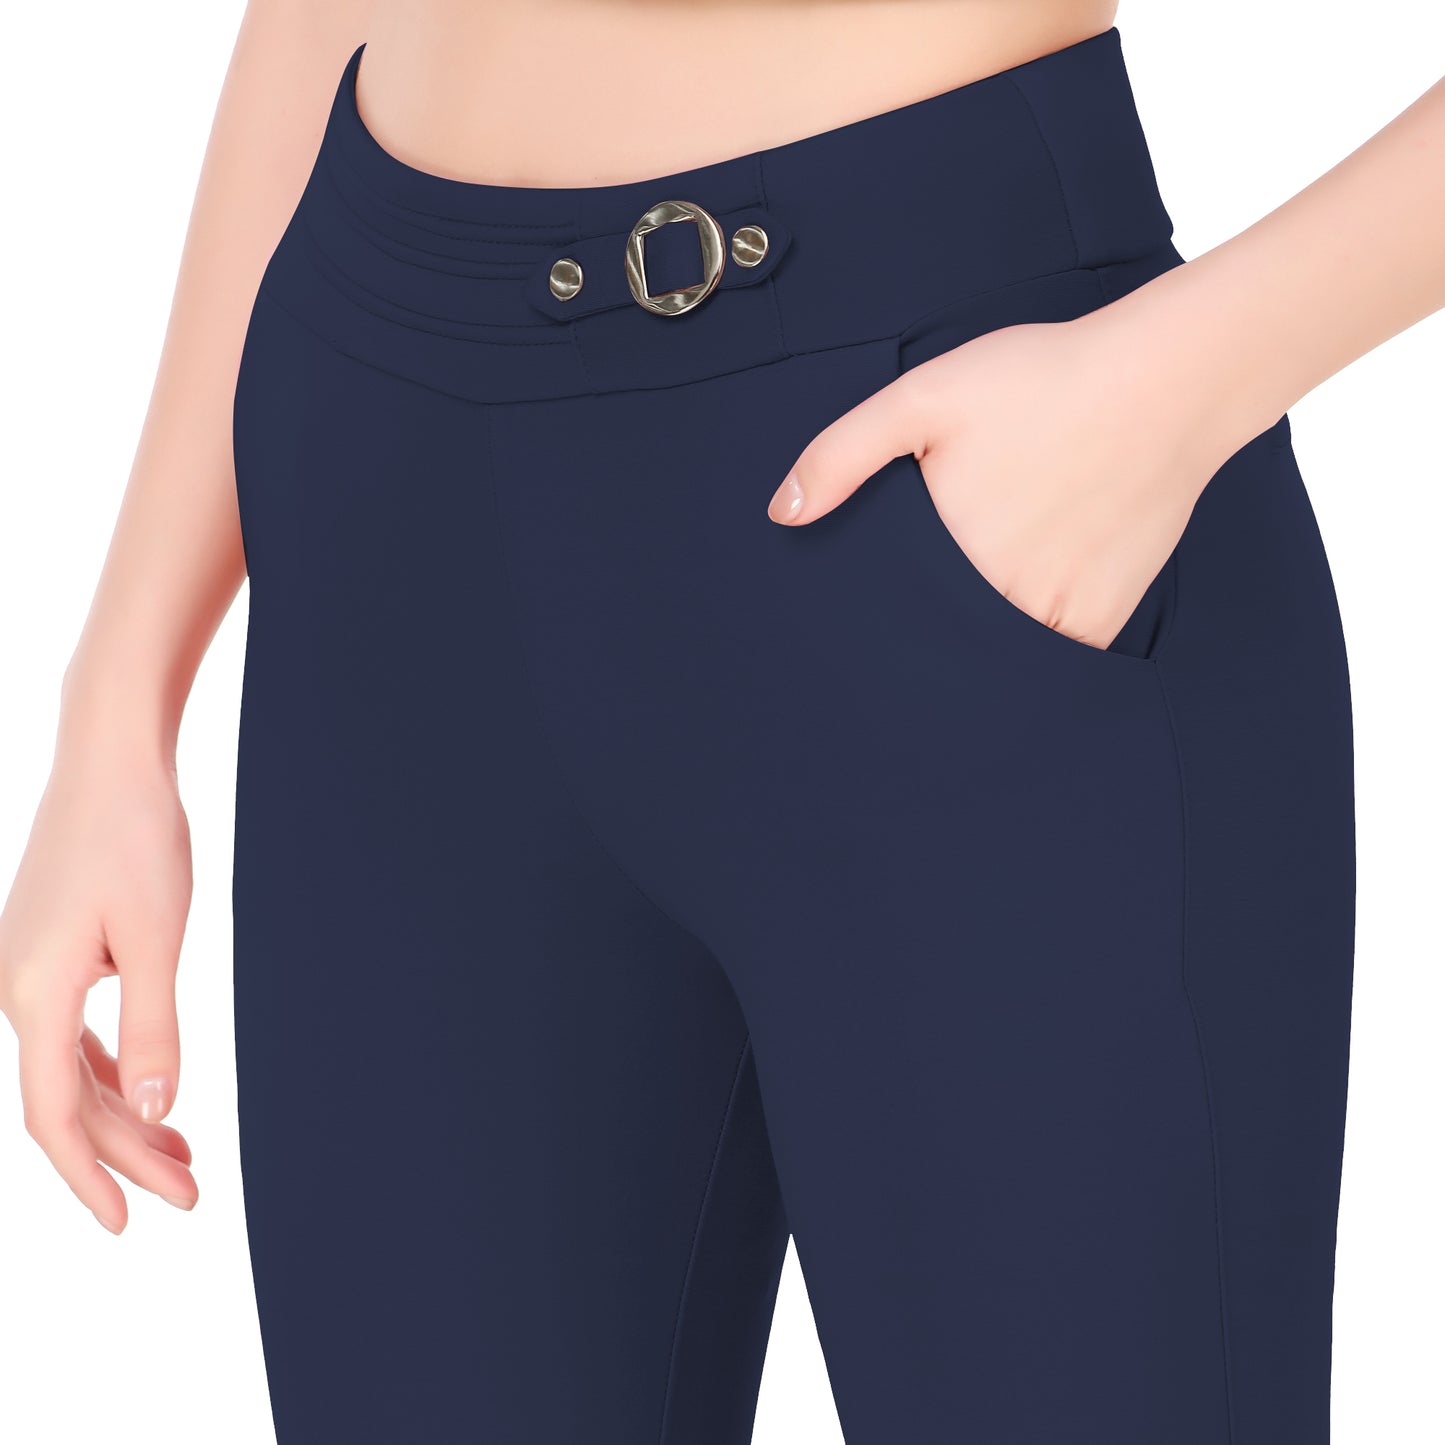 Most Comfortable Women's Mid-Waist Jeggings with 2 Front Pockets - Slate Blue